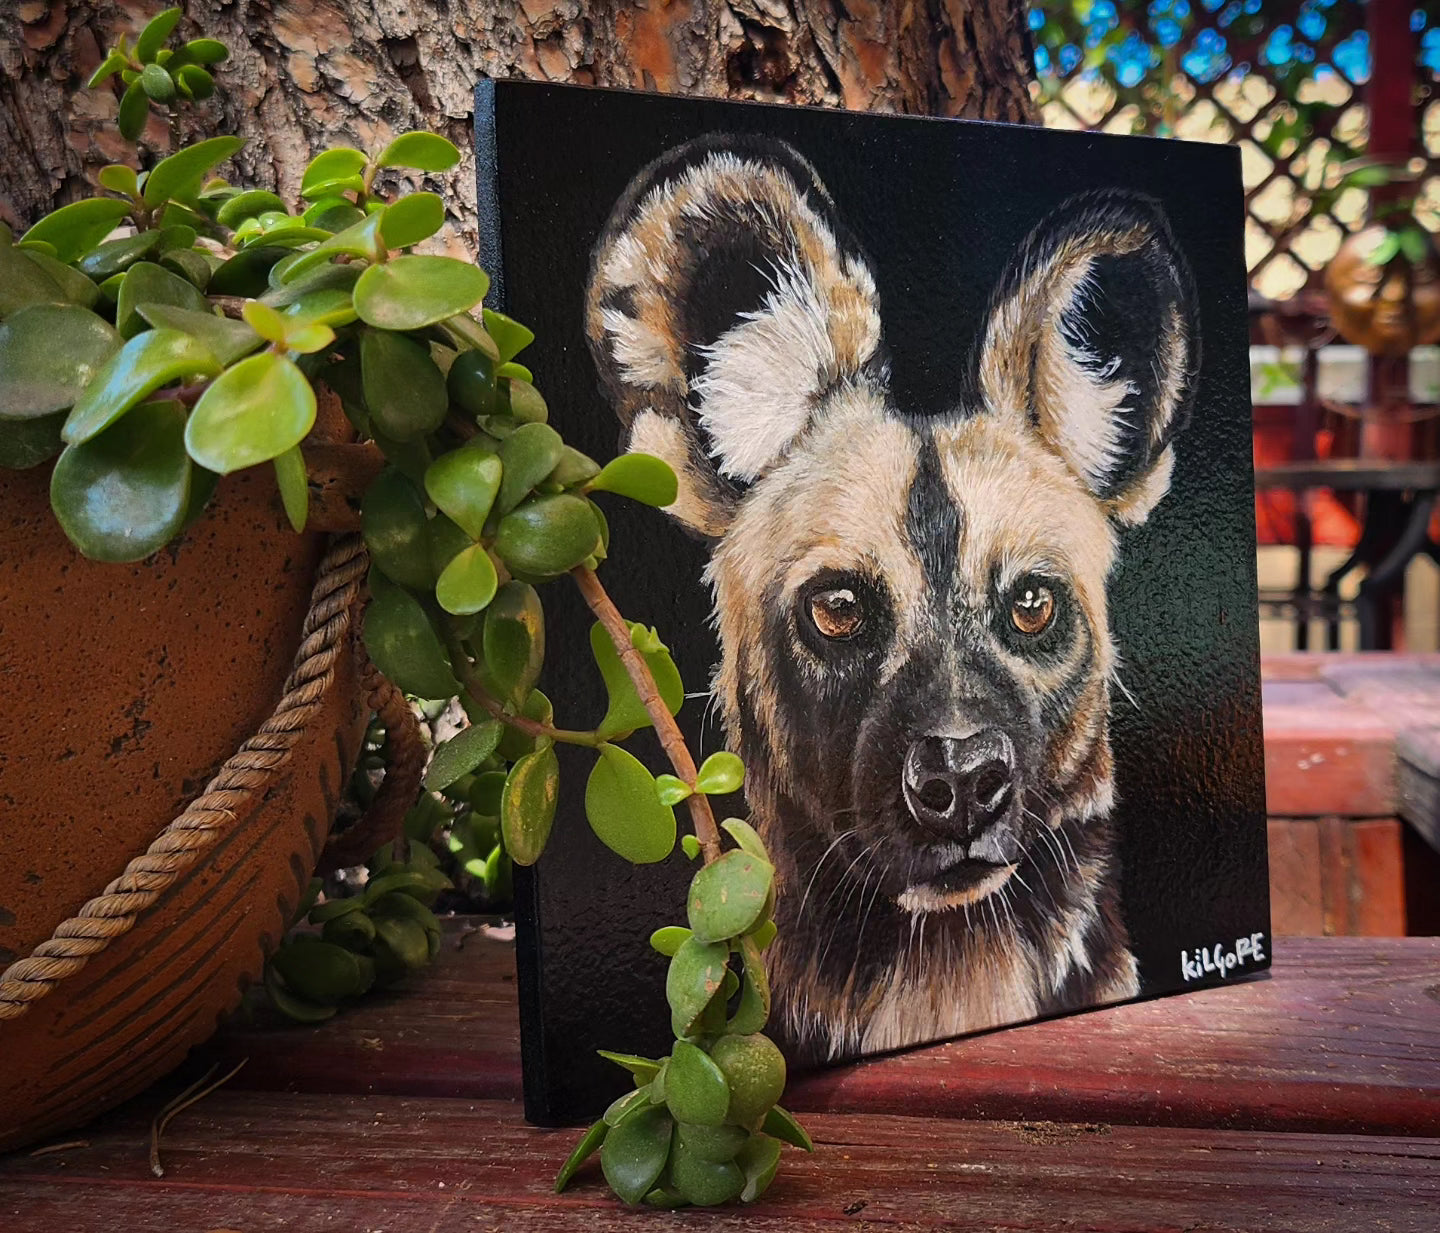 African Wild Dog - Original Acrylic Painting - By Kilgore, Original 7" x 7" Acrylic Painting on Wood, Painted Dog, Cape Hunting Dog